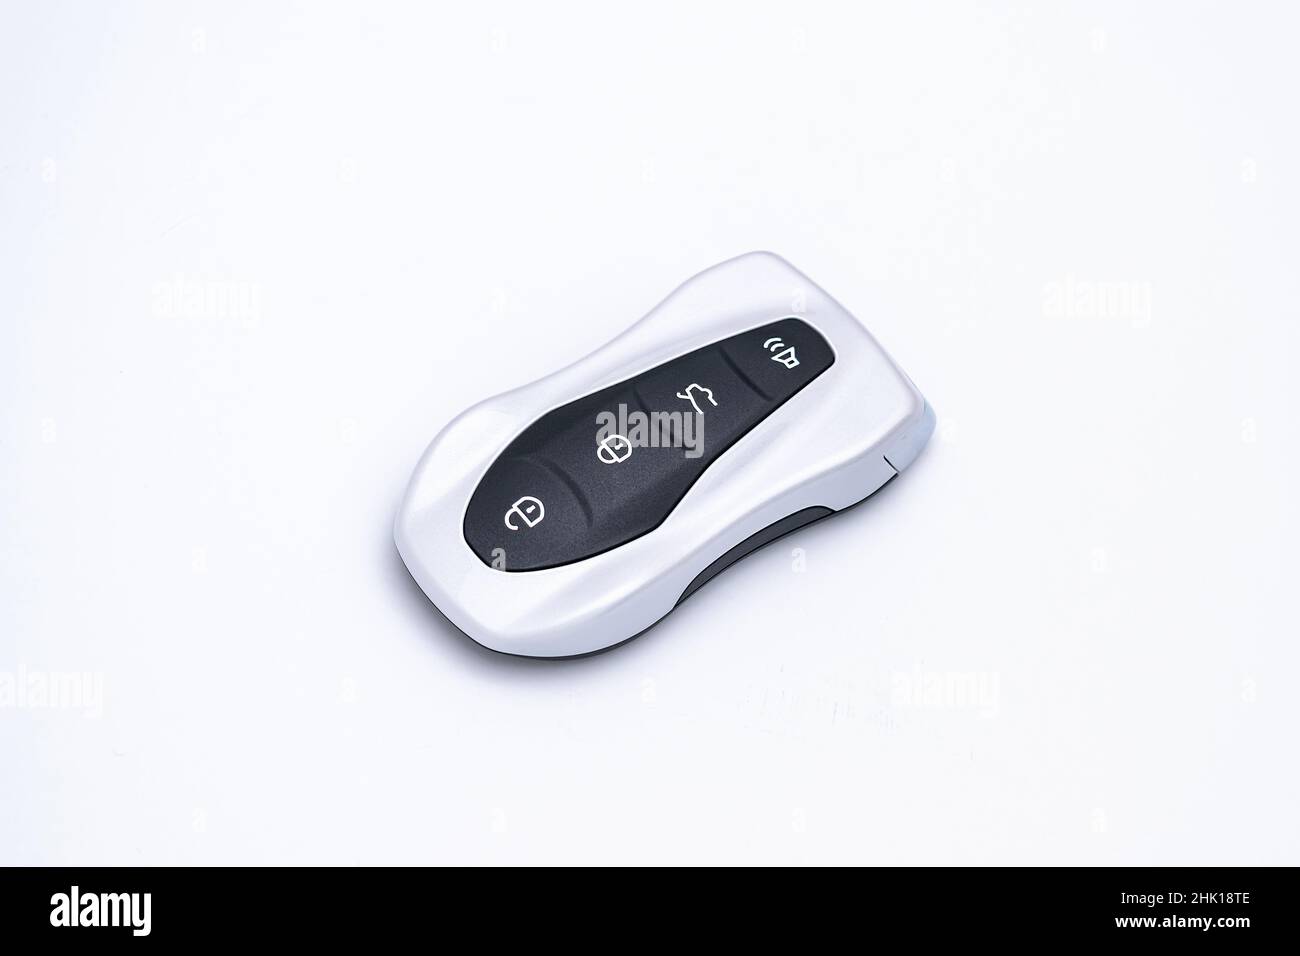 Smart car key on a white background. Electronics, spare parts and car accessories. Horizontal photo. Stock Photo